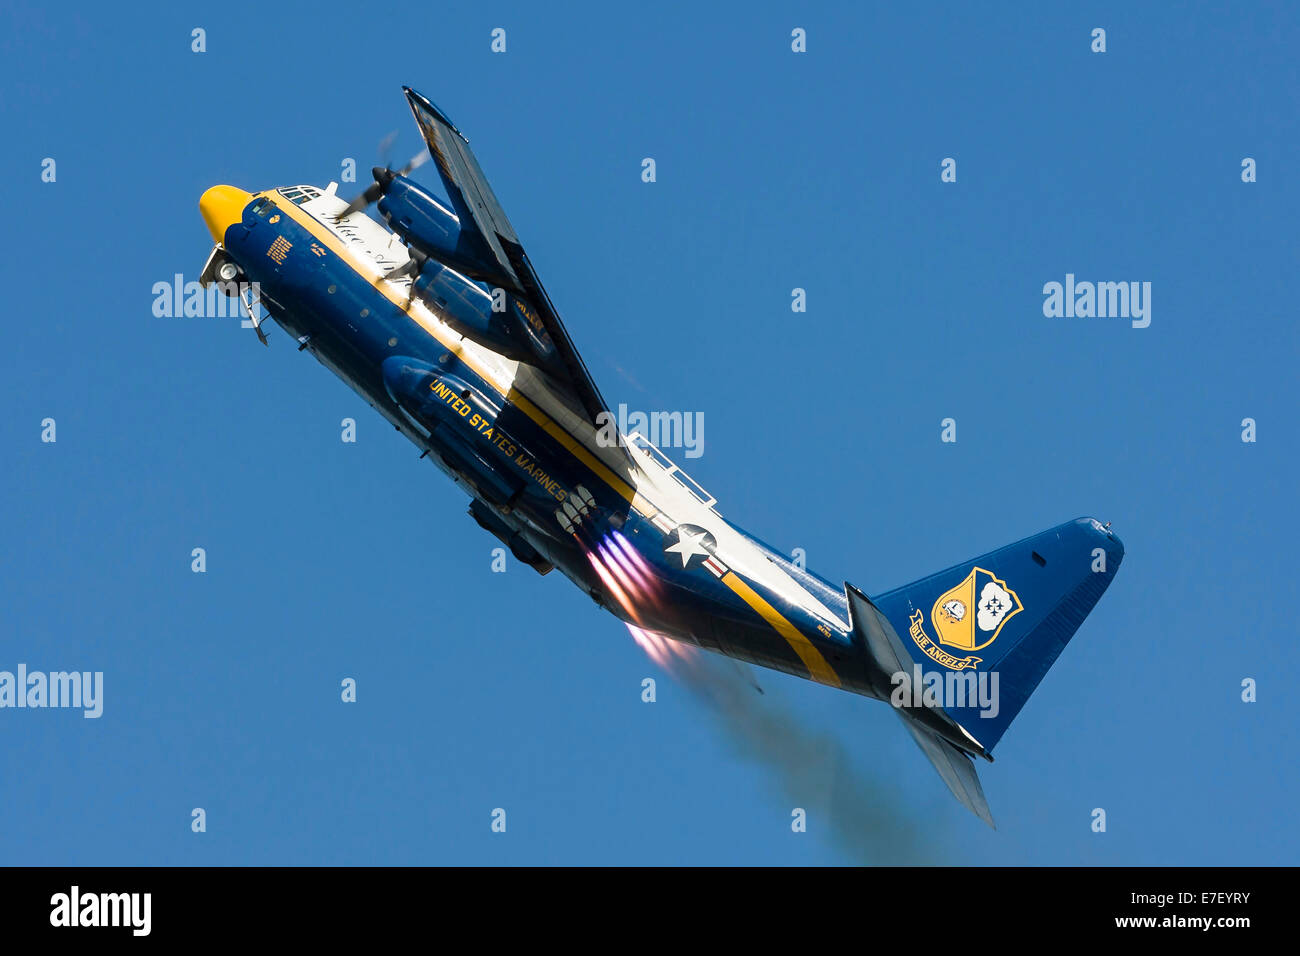 The Blue Angels C-130 Hercules, Fat Albert, performs a JATO takeoff at Andrews Air Force Base, Maryland. Stock Photo